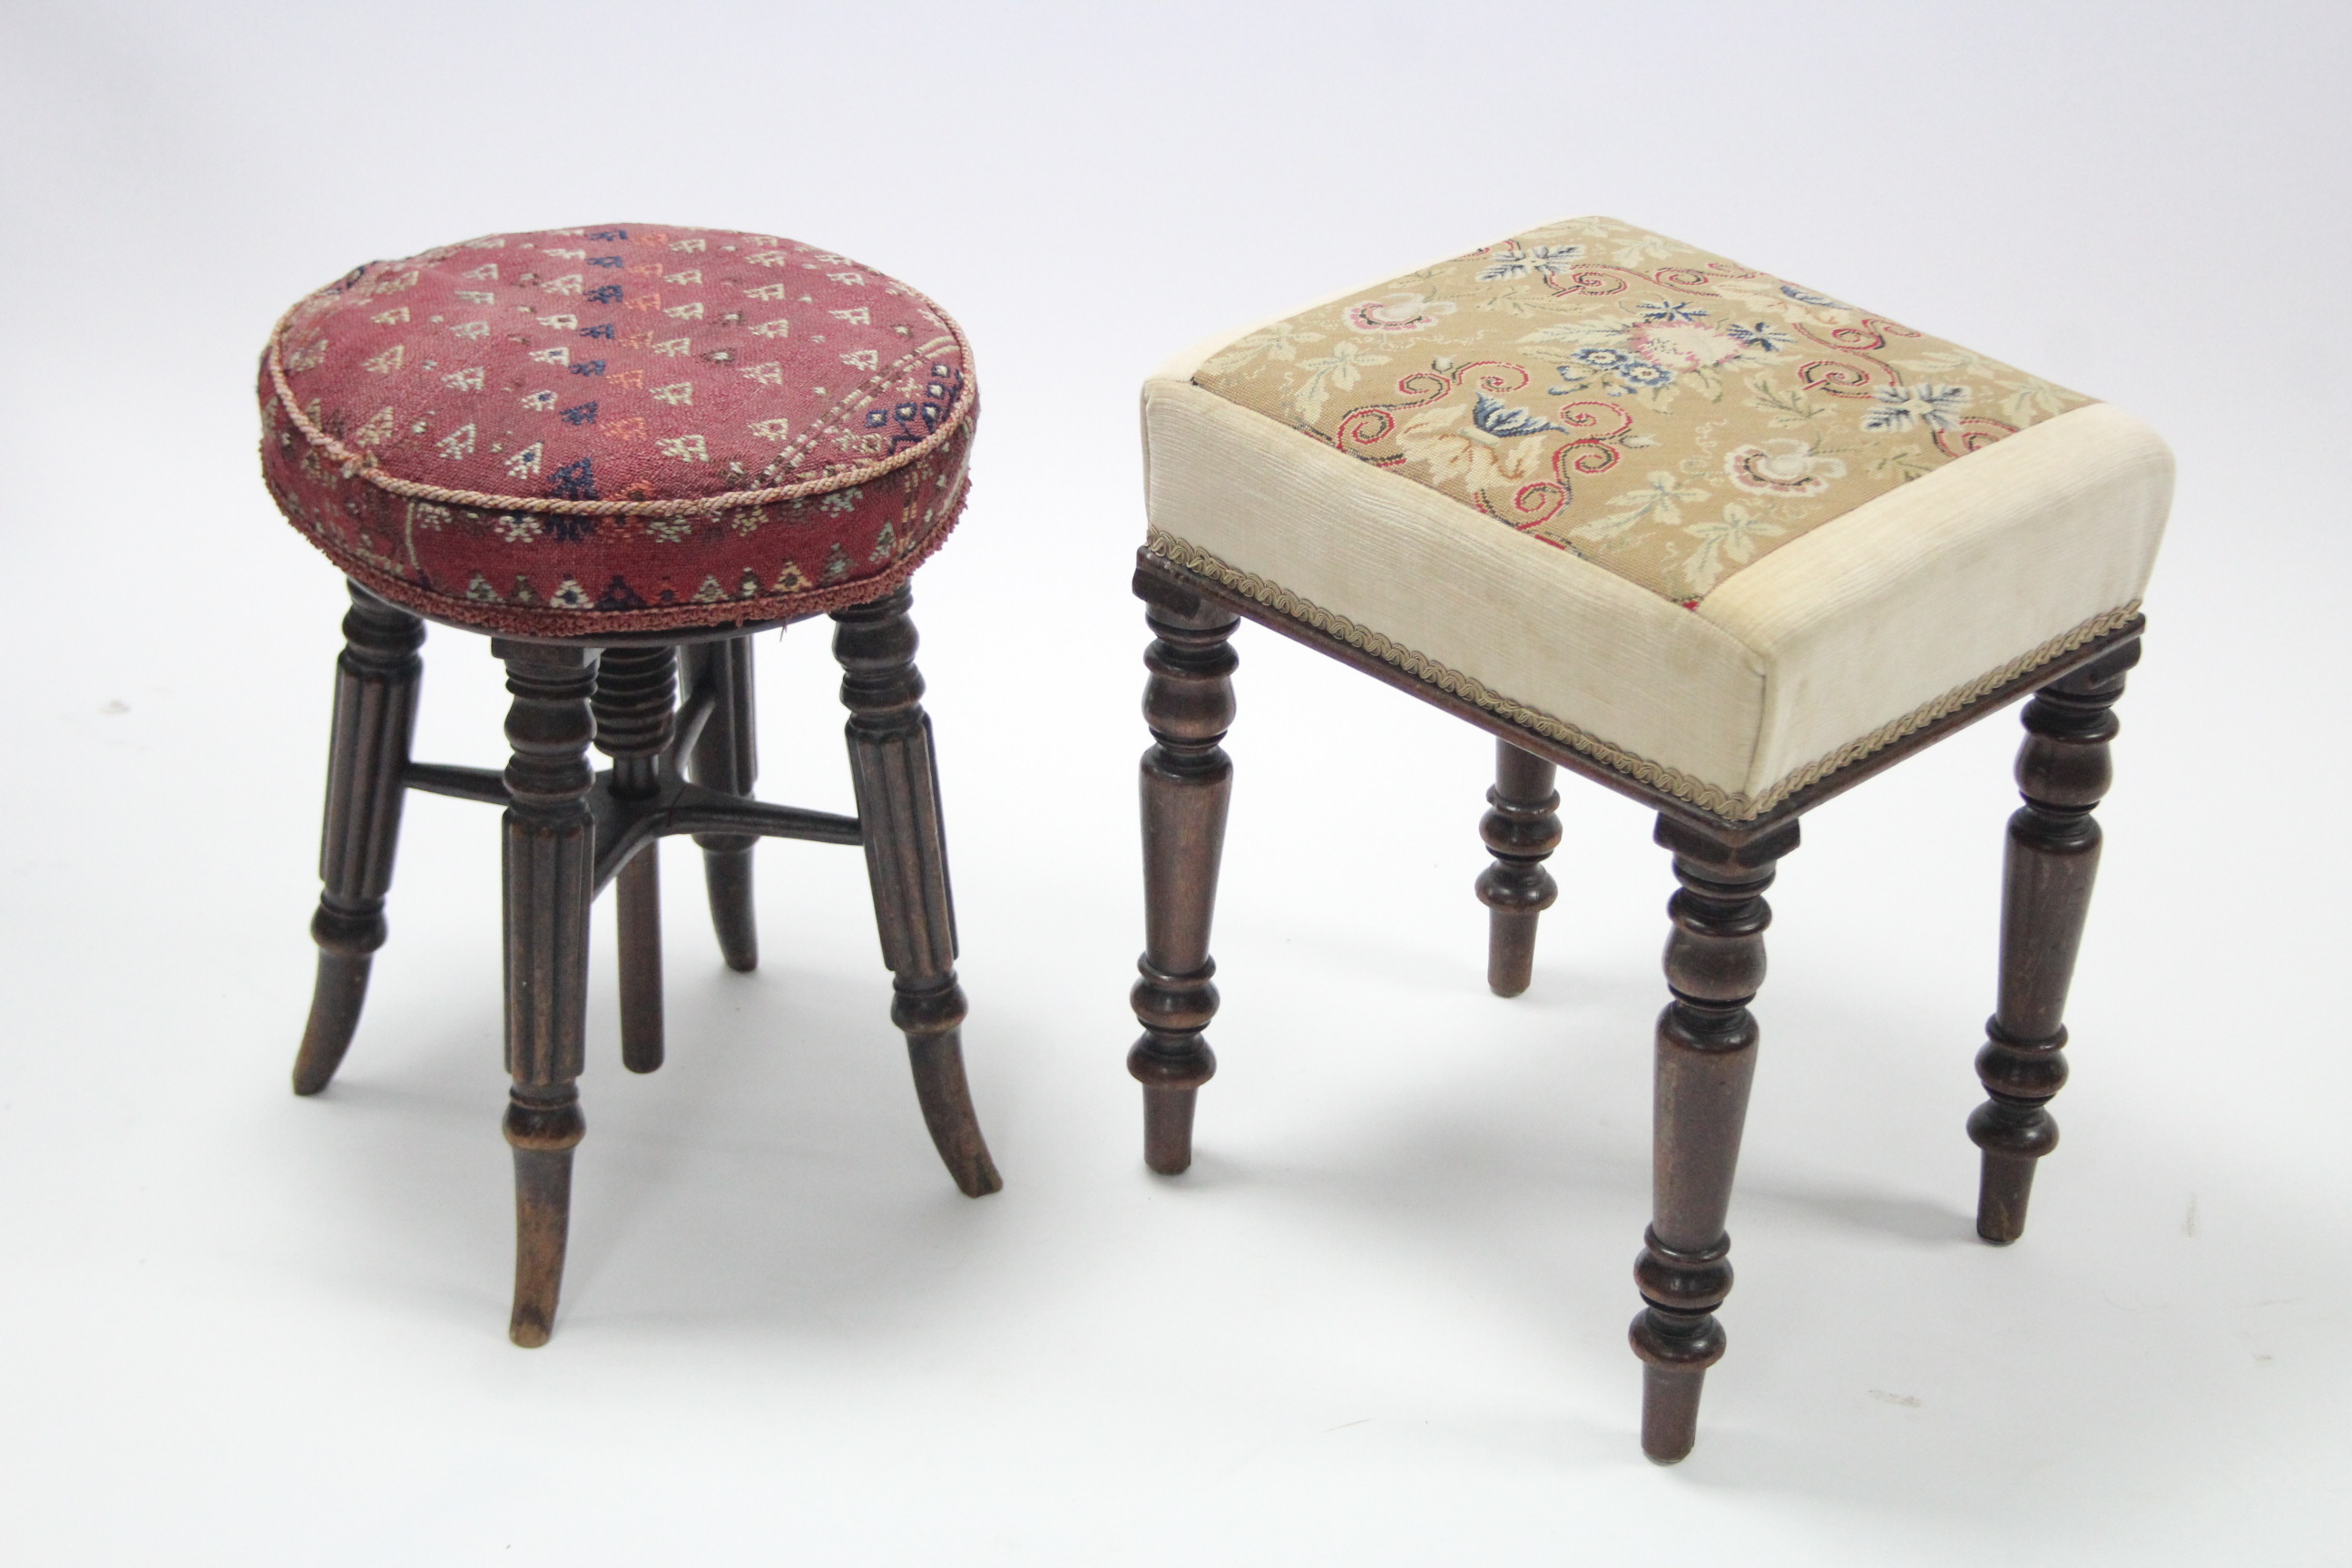 An early Victorian mahogany rectangular stool with padded seat upholstered floral material, on